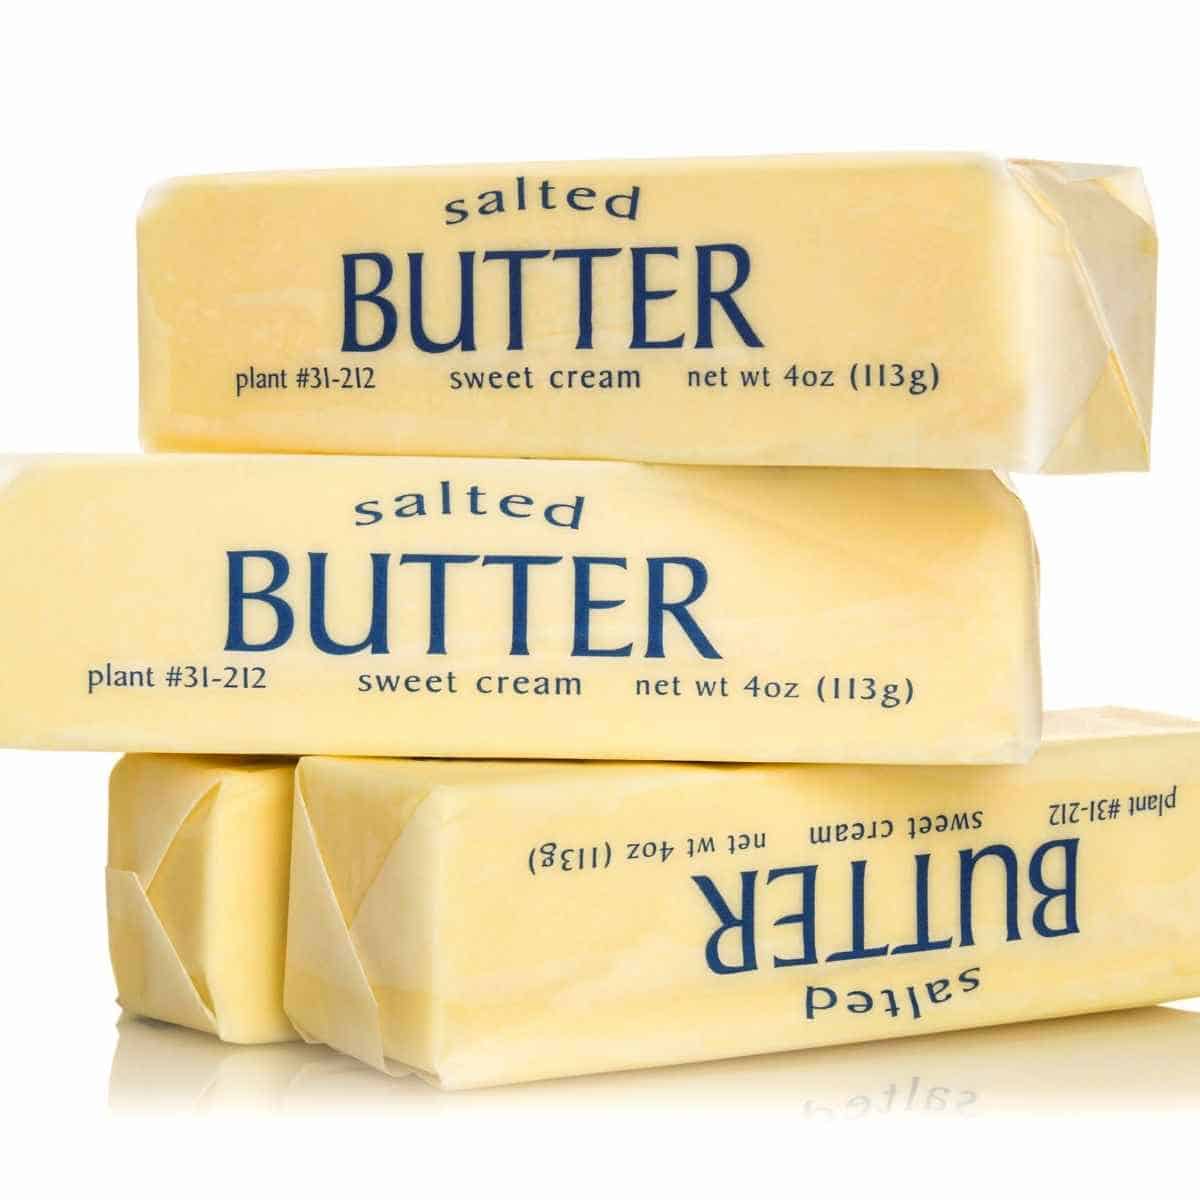 sticks of butter - Eating Sticks of Butter on Keto: A Nutritionist and a Dr. Way In